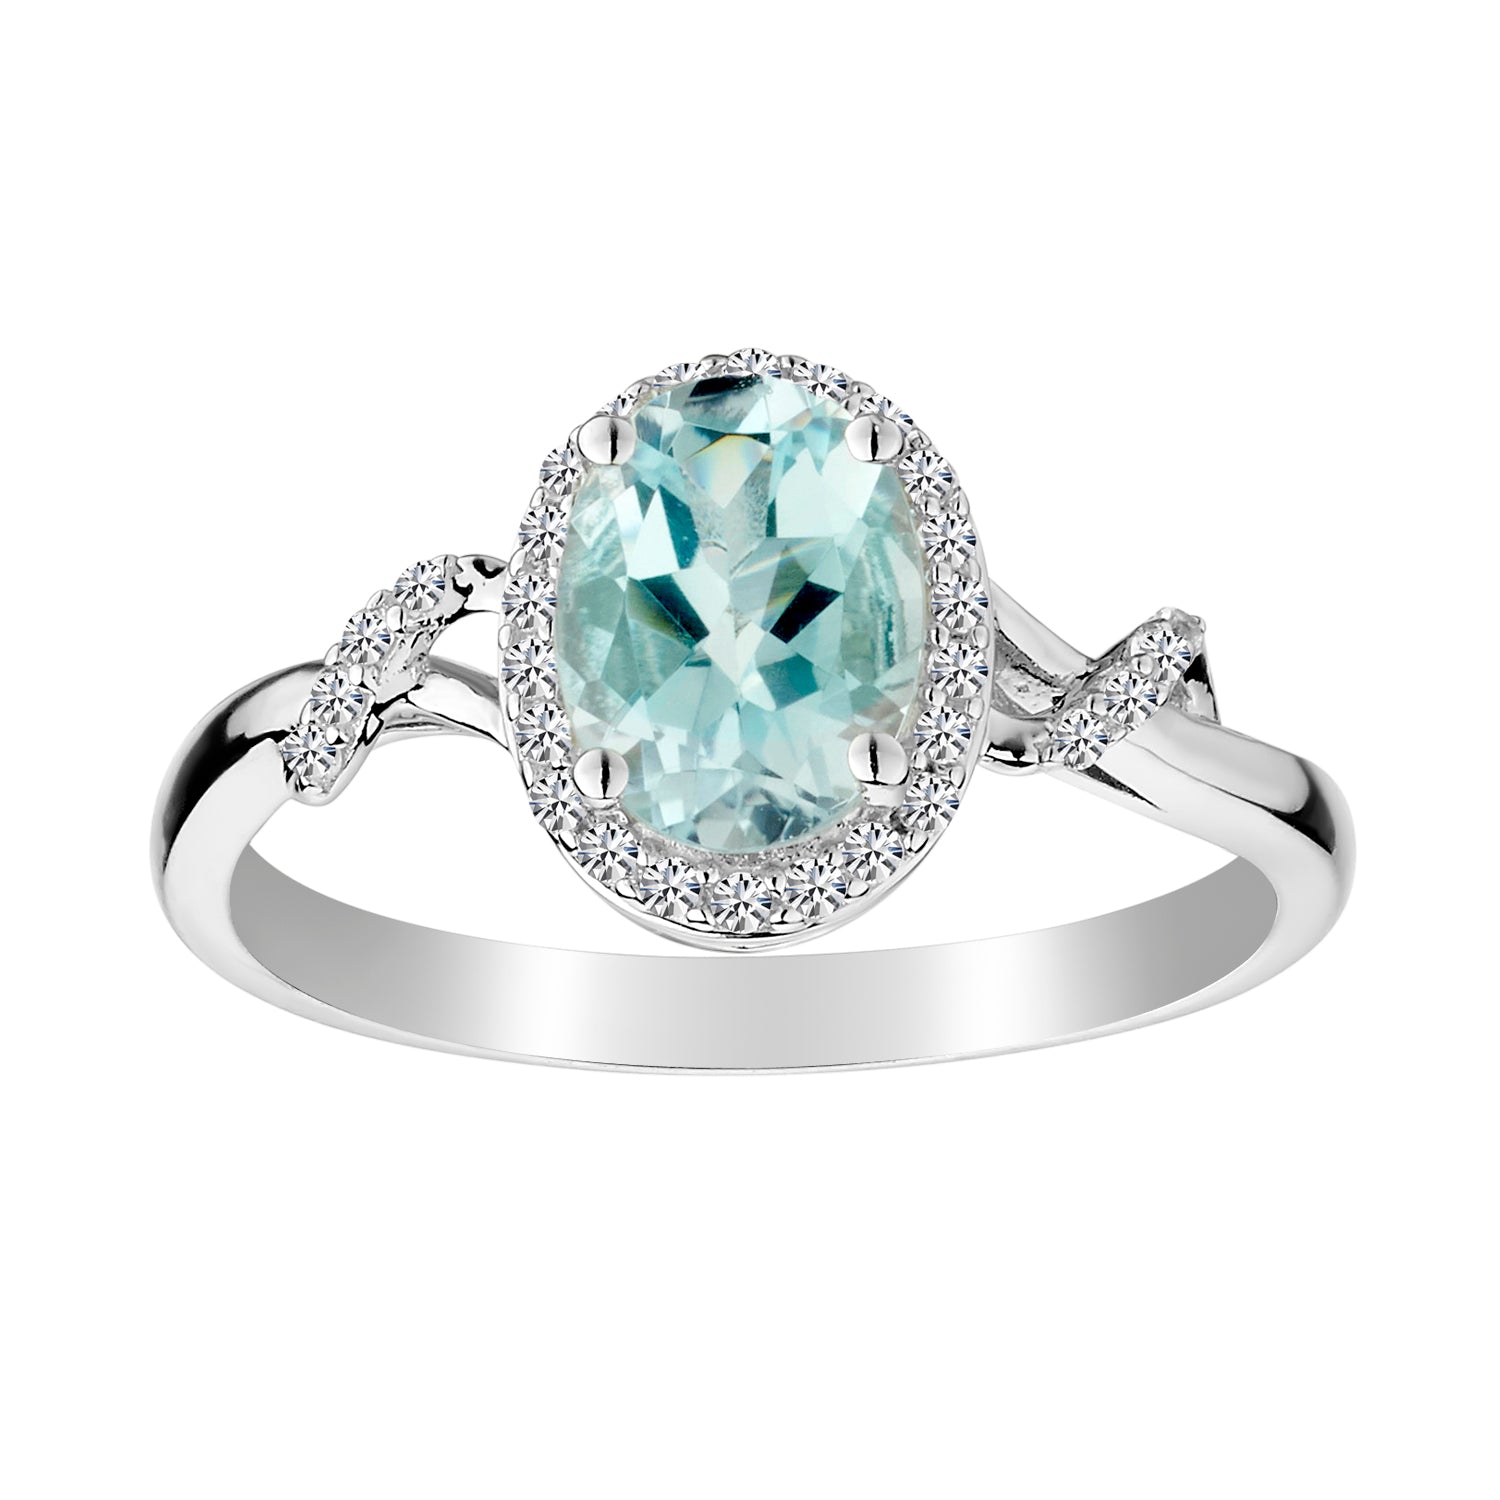 Genuine Aquamarine and White Sapphire Ring,  Sterling Silver. Gemstone Rings. Griffin Jewellery Designs